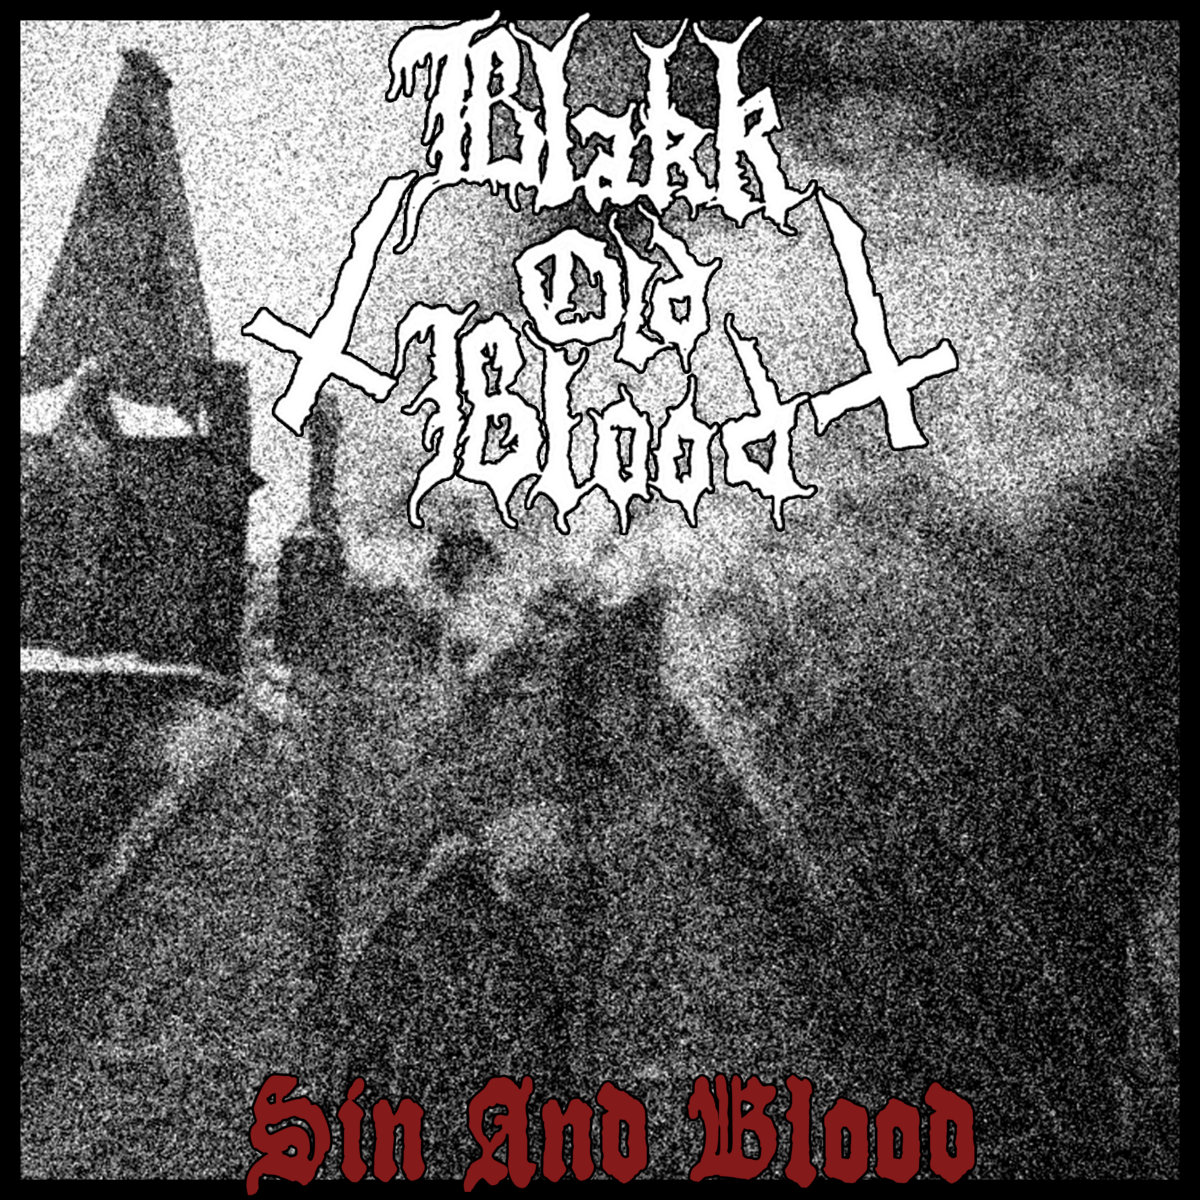 Est 13. Old Blood. Holy Sinner Blood. Funeral Rites. Bloody sin: Abominations of the Reich 2015.